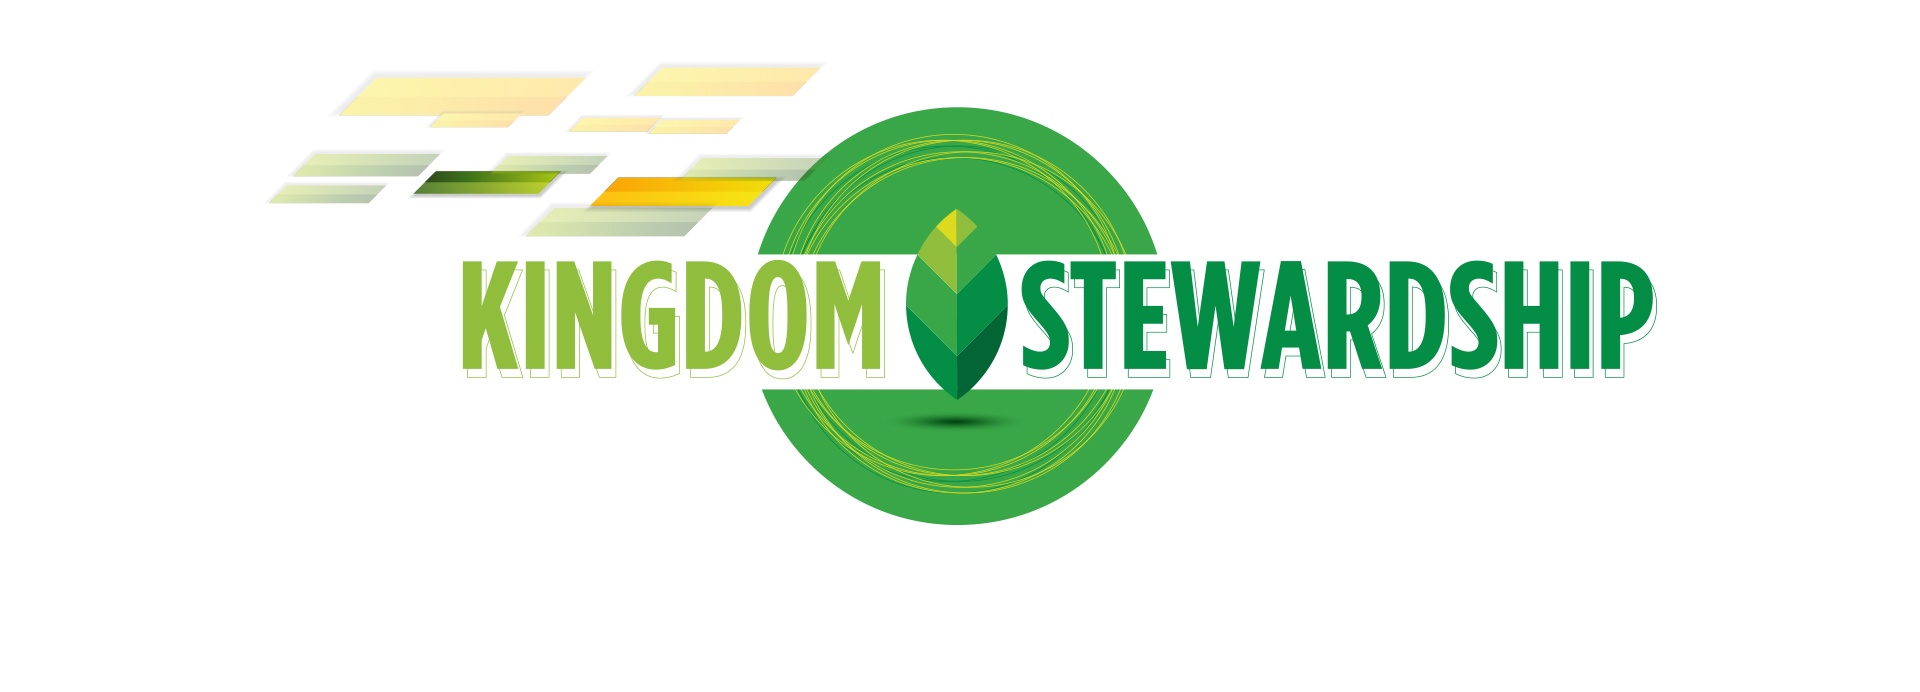 The Perspective of Kingdom Stewardship